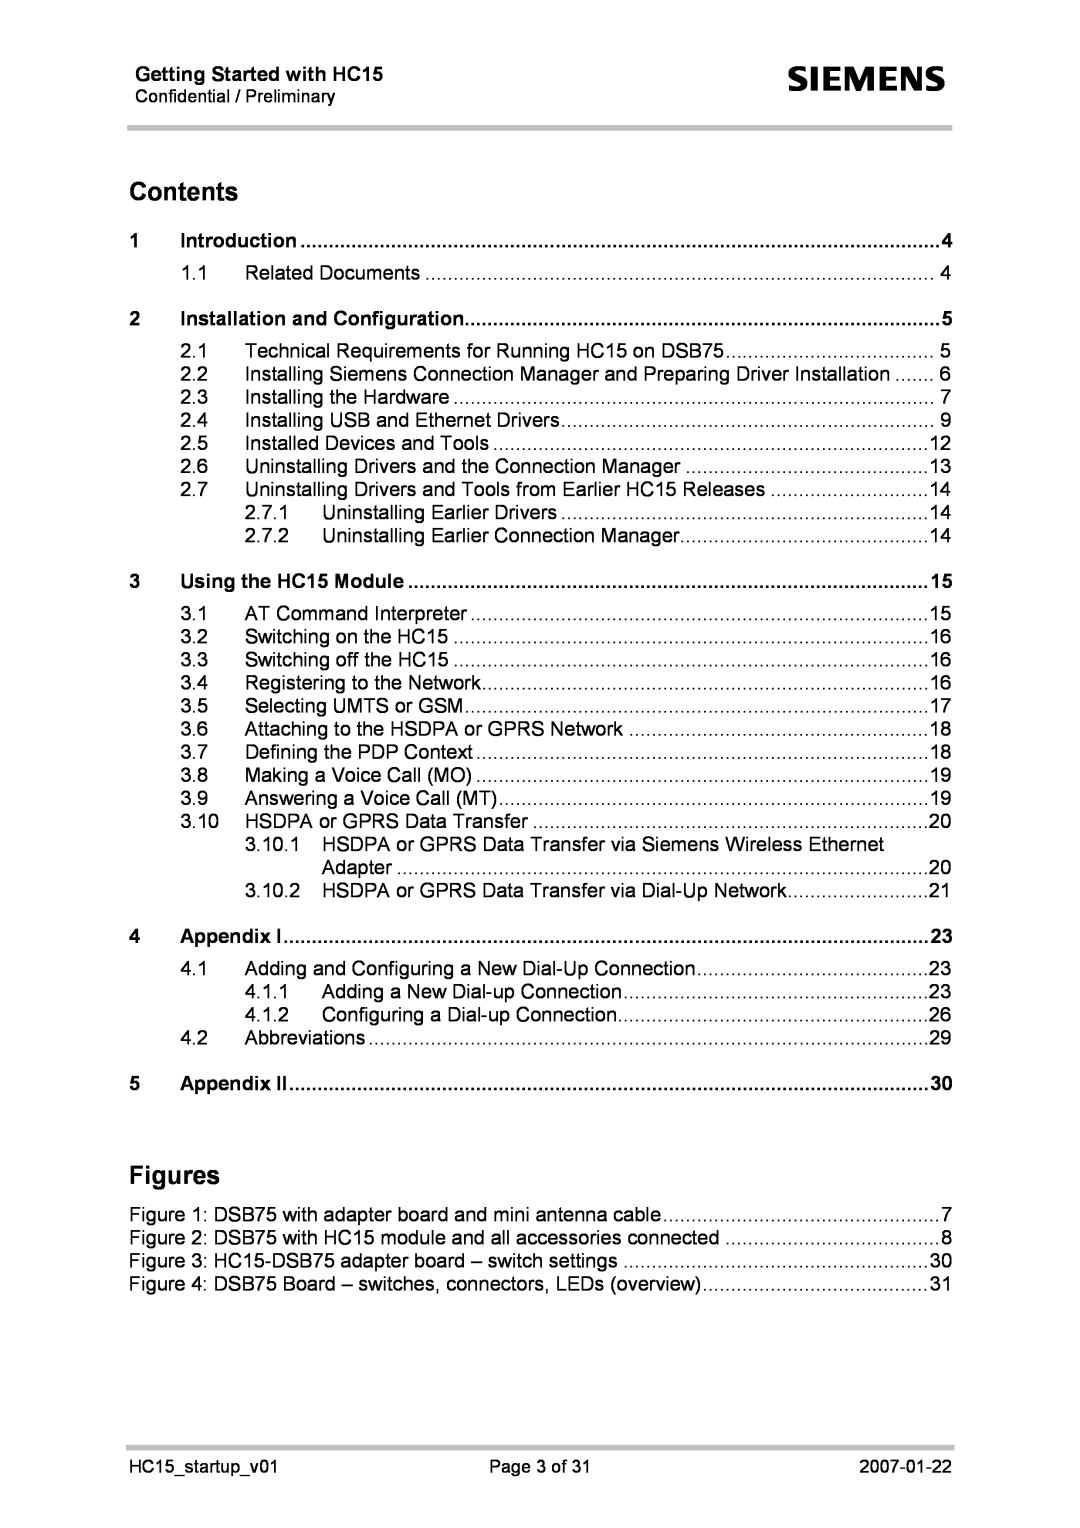 Siemens manual Contents, Figures, Introduction, Installation and Configuration, Using the HC15 Module, Appendix 